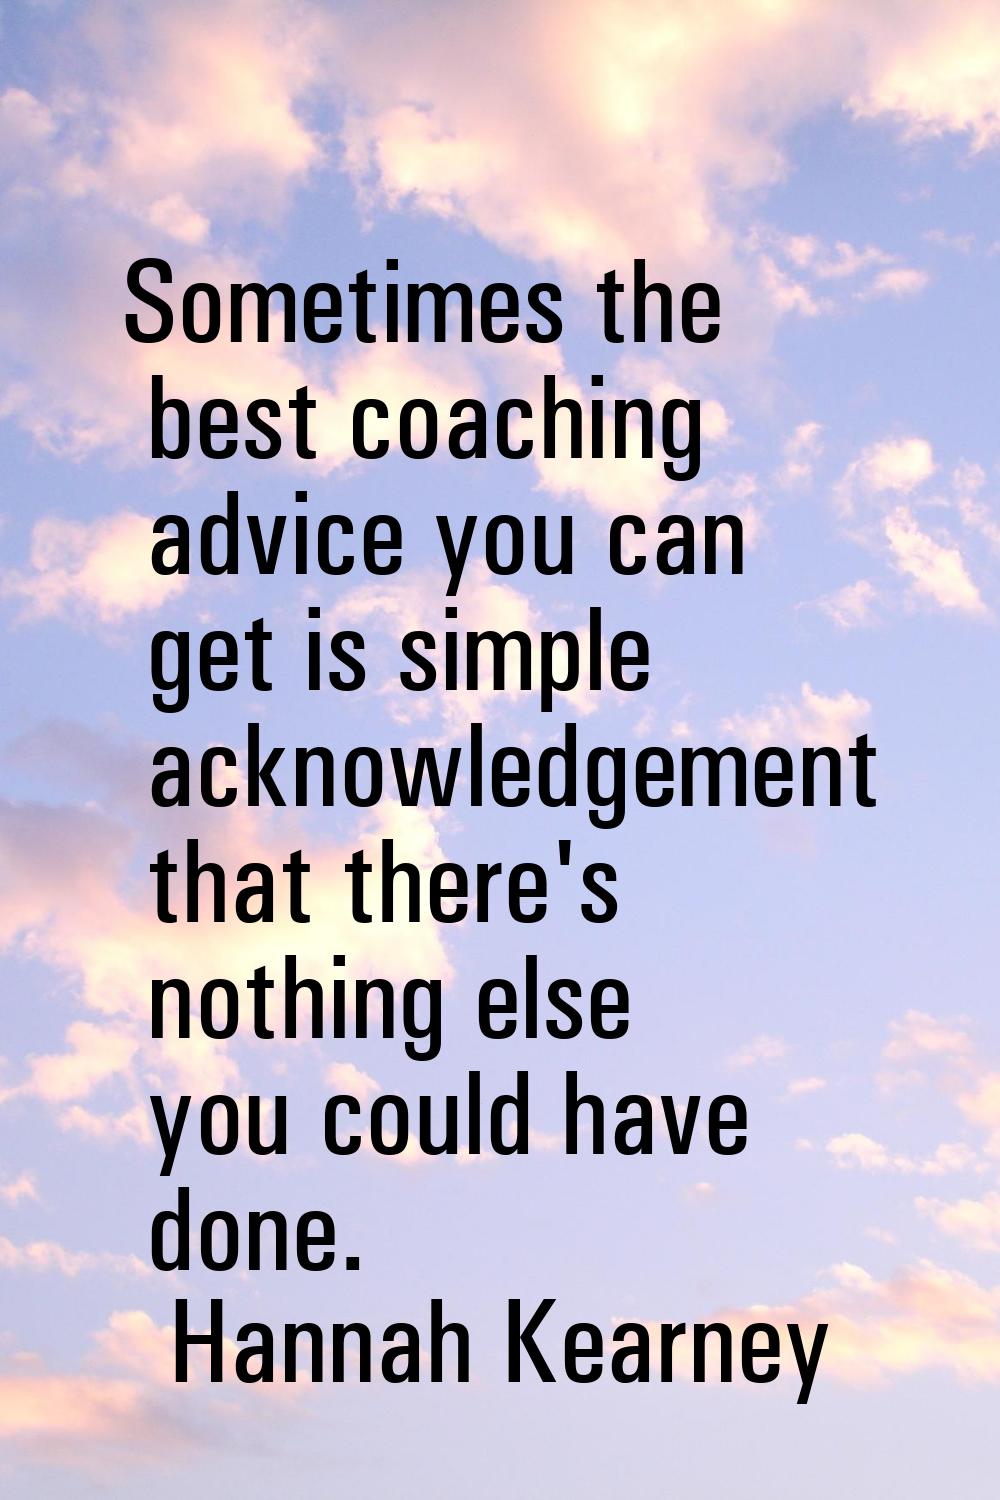 Sometimes the best coaching advice you can get is simple acknowledgement that there's nothing else 